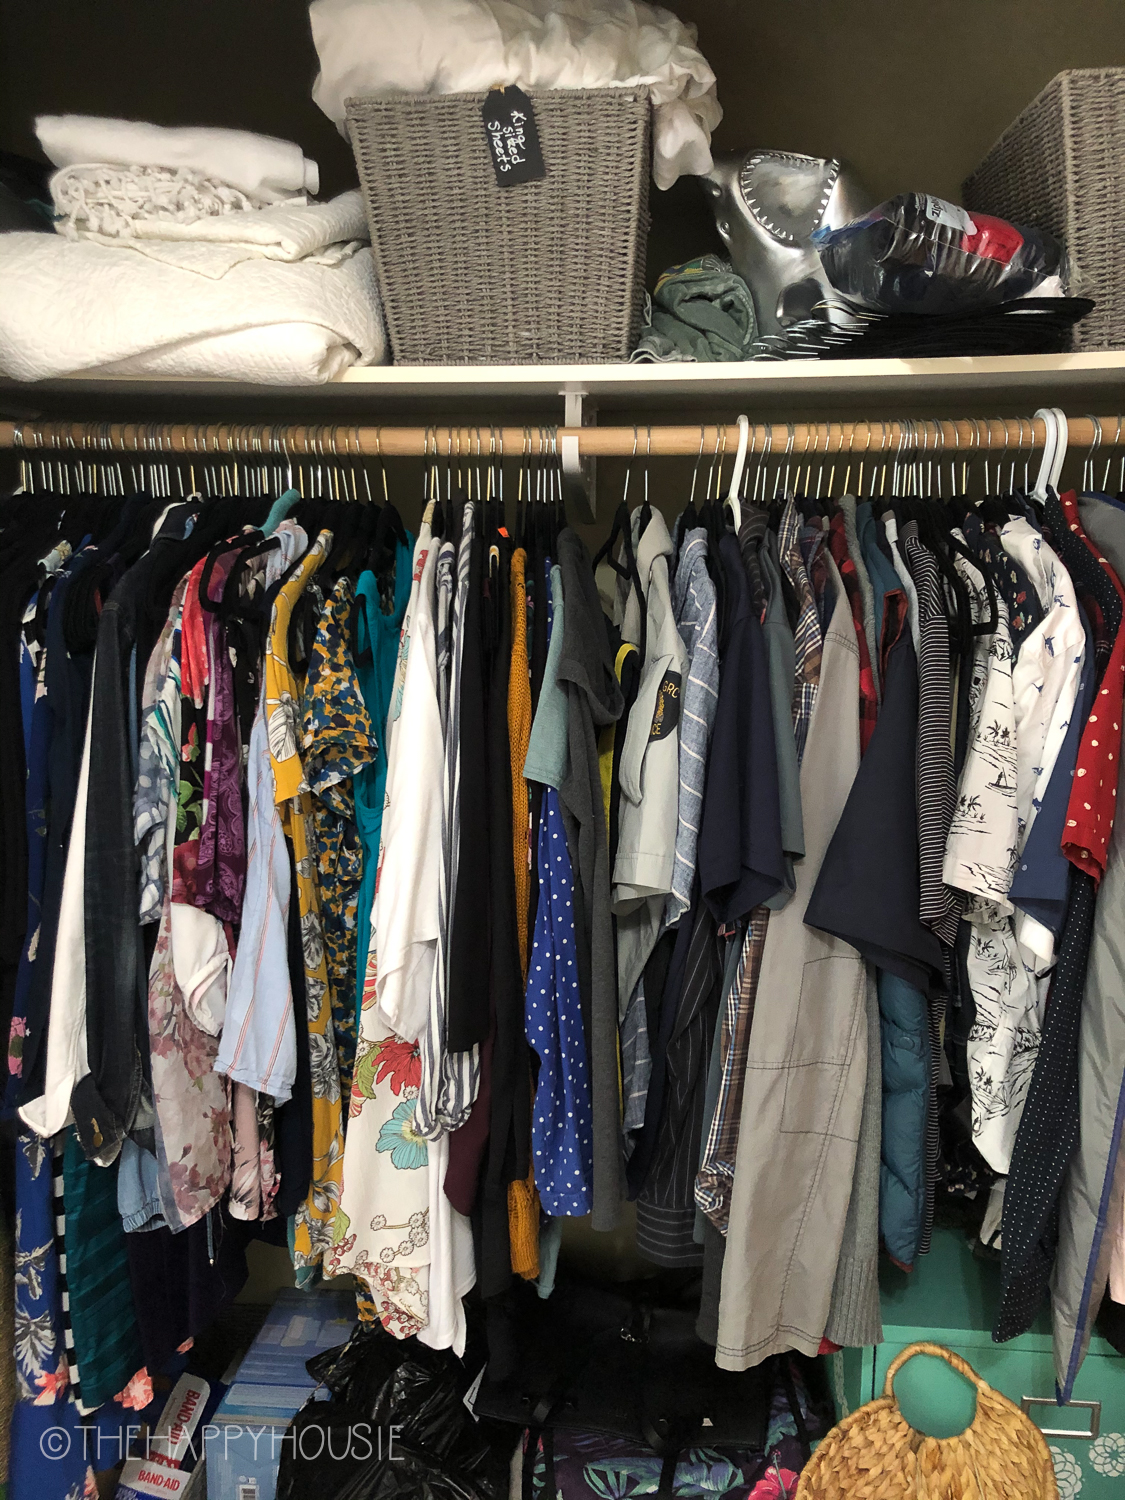 https://www.thehappyhousie.com/wp-content/uploads/2020/08/how-to-organize-a-small-reach-in-closet-for-multi-purpose-storage-09.jpg